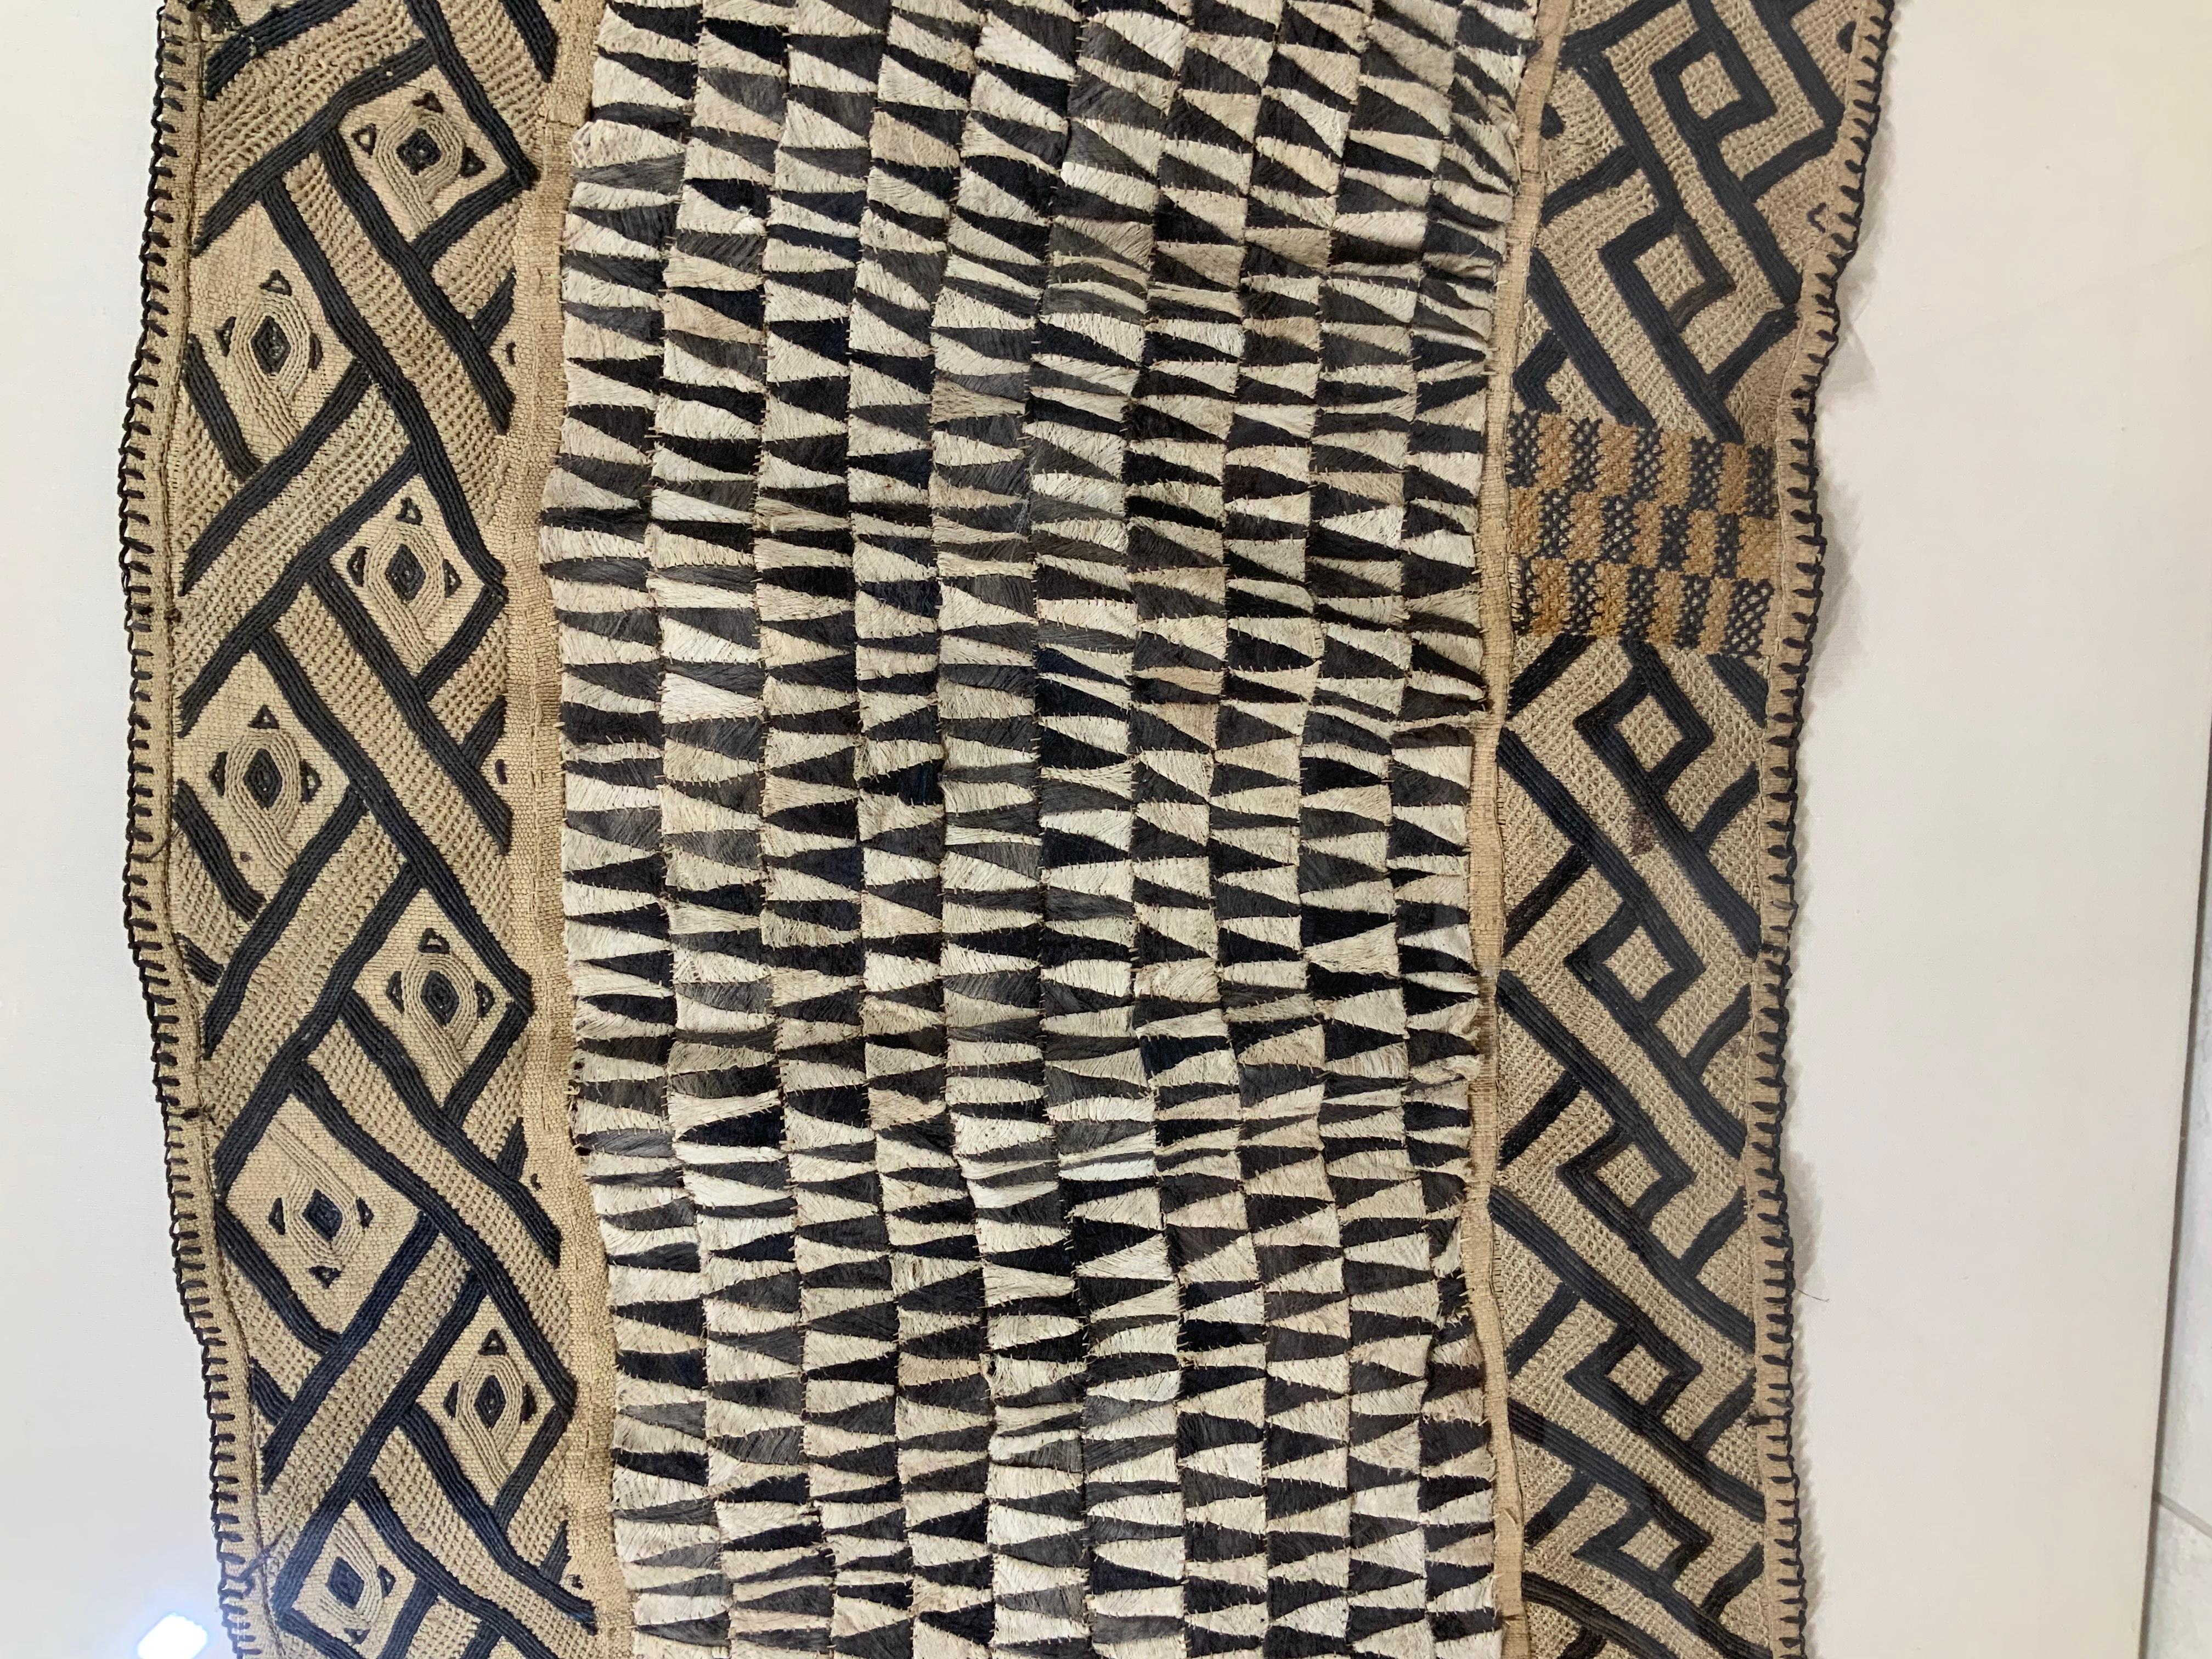 Large Antique Horizontal African Textile  Shadowbox Wall Hanging In Good Condition For Sale In Delray Beach, FL